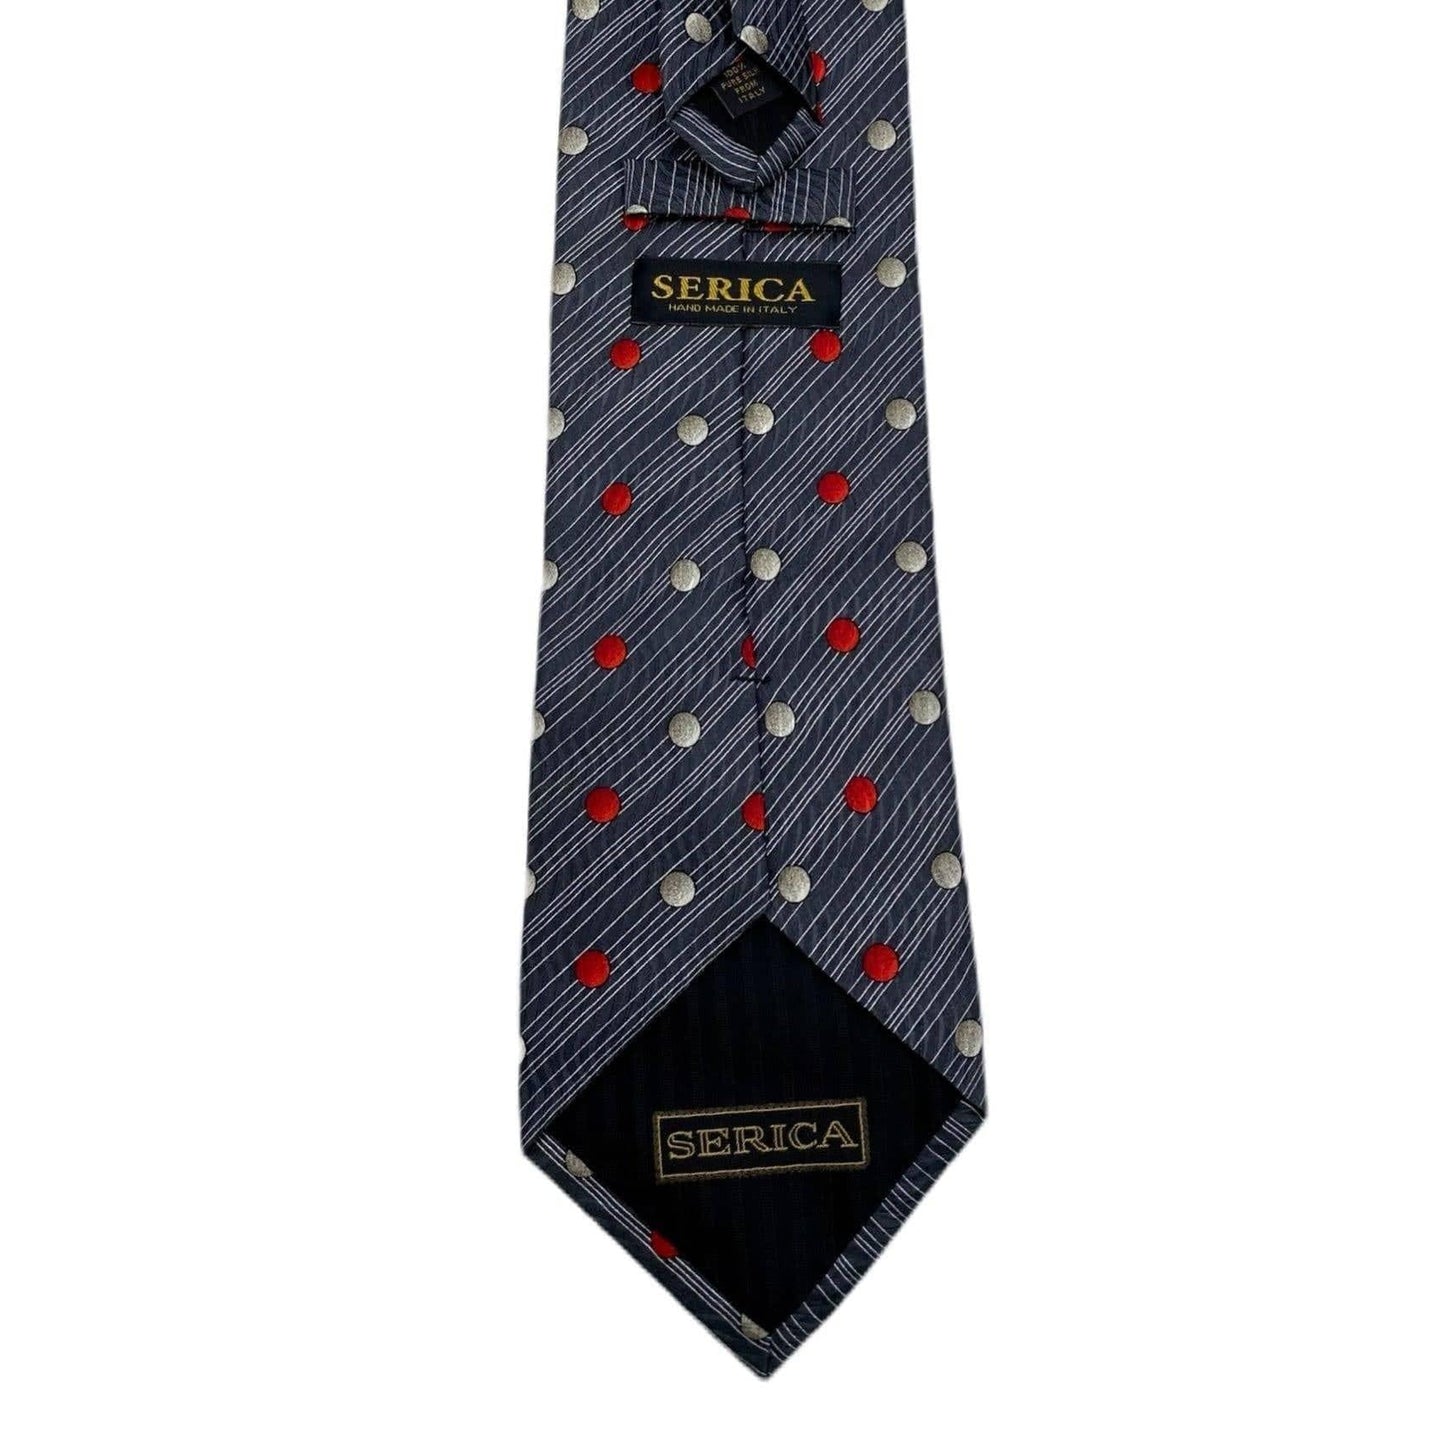 Diagonal Stripes with Dots Mens Tie